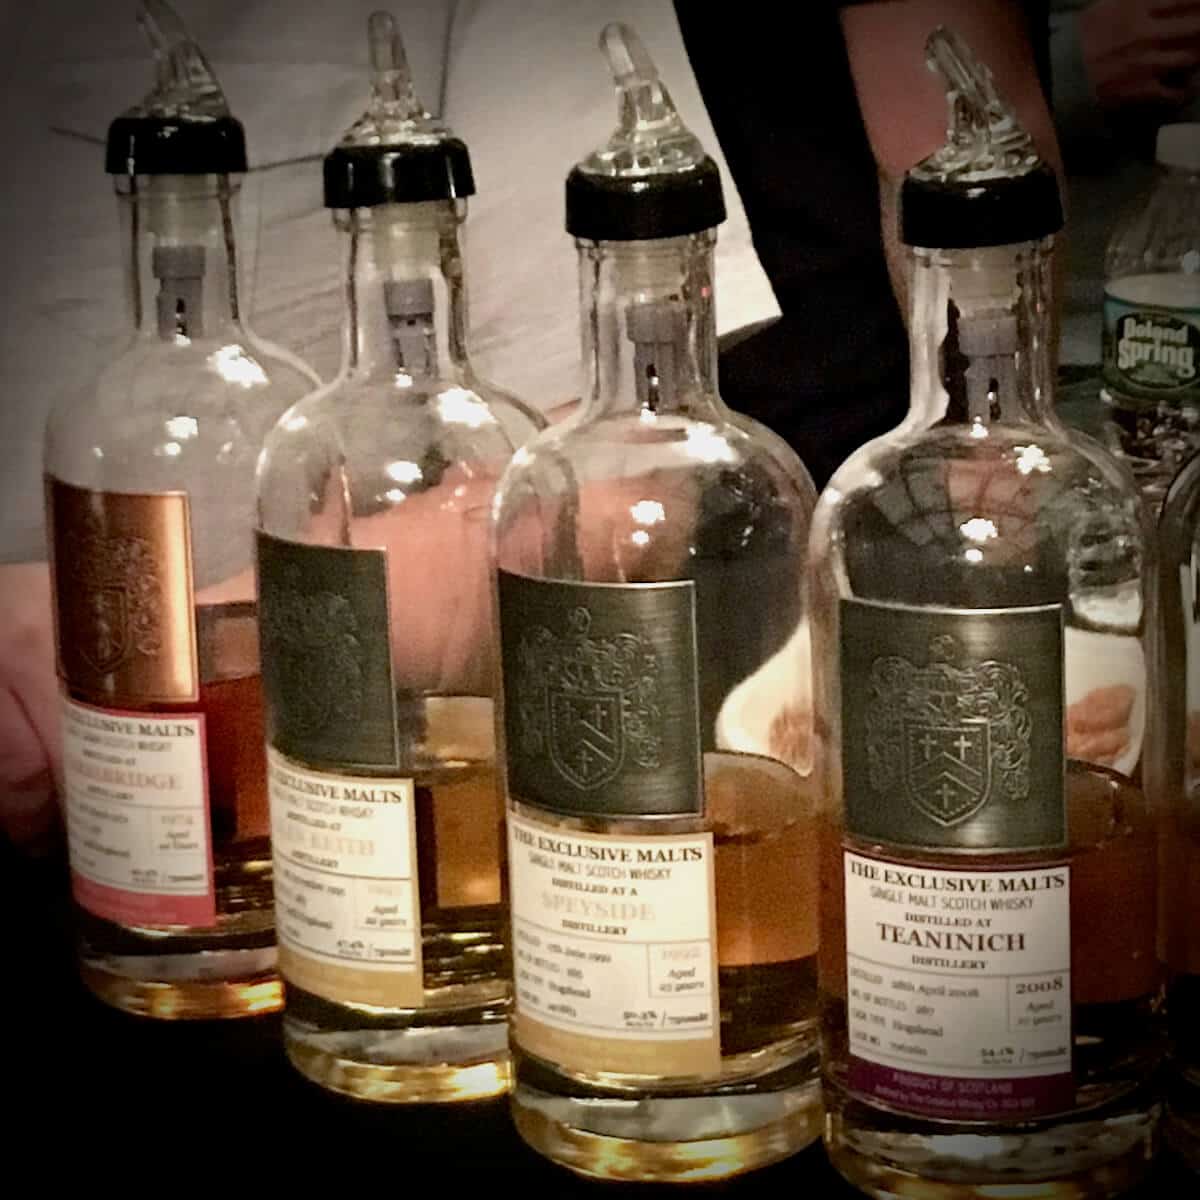 Some of the Exclusive Malts bottles on a table.